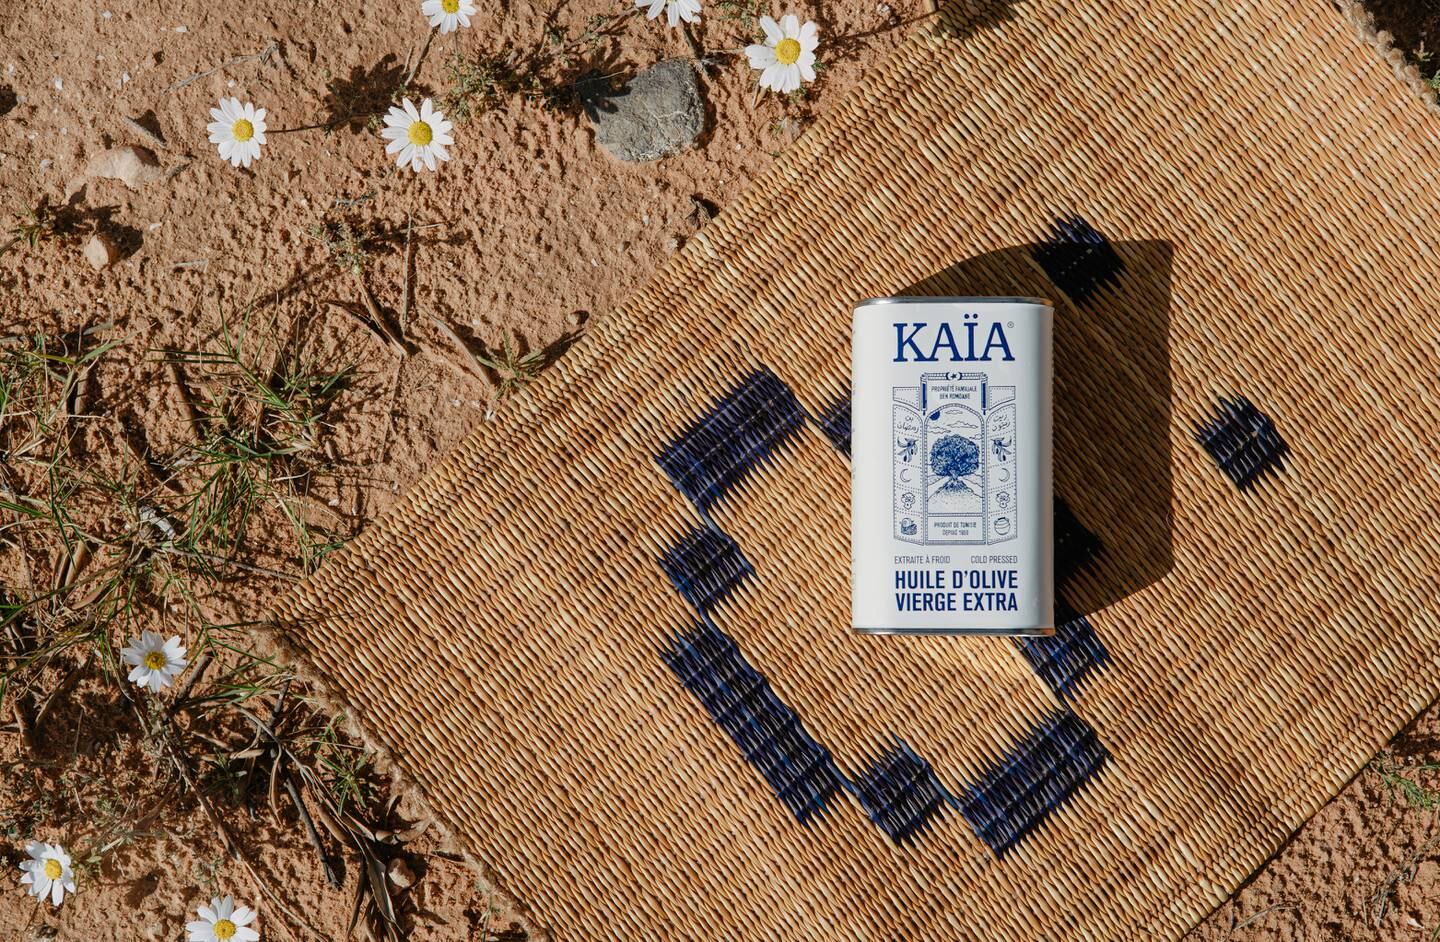 Kaïa is the first time the Ben Romdane estates have marketed an olive oil as made in Tunisia in nearly 60 years. Photo: courtesy Sarah Ben Romdane